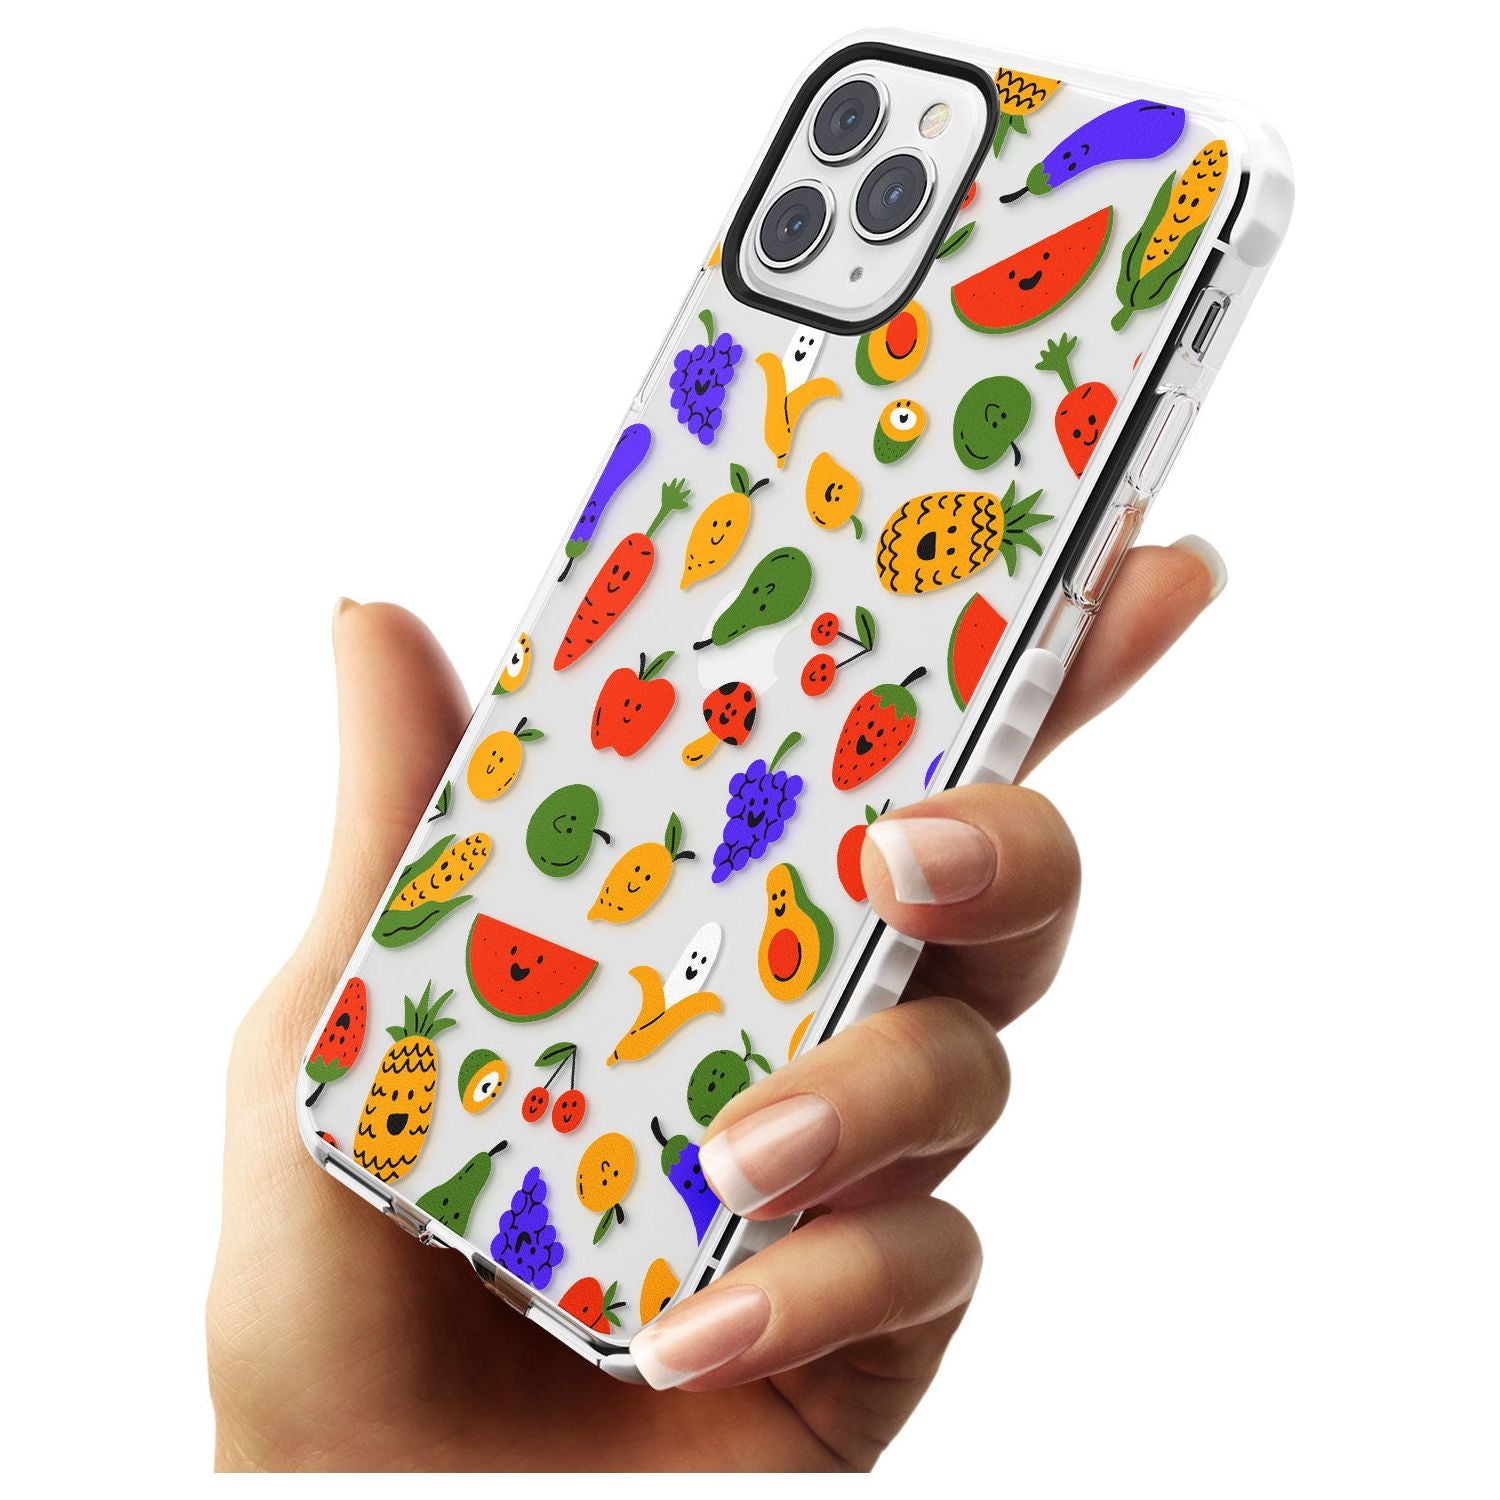 Mixed Kawaii Food Icons - Clear iPhone Case Impact Phone Case Warehouse 11 Pro Max